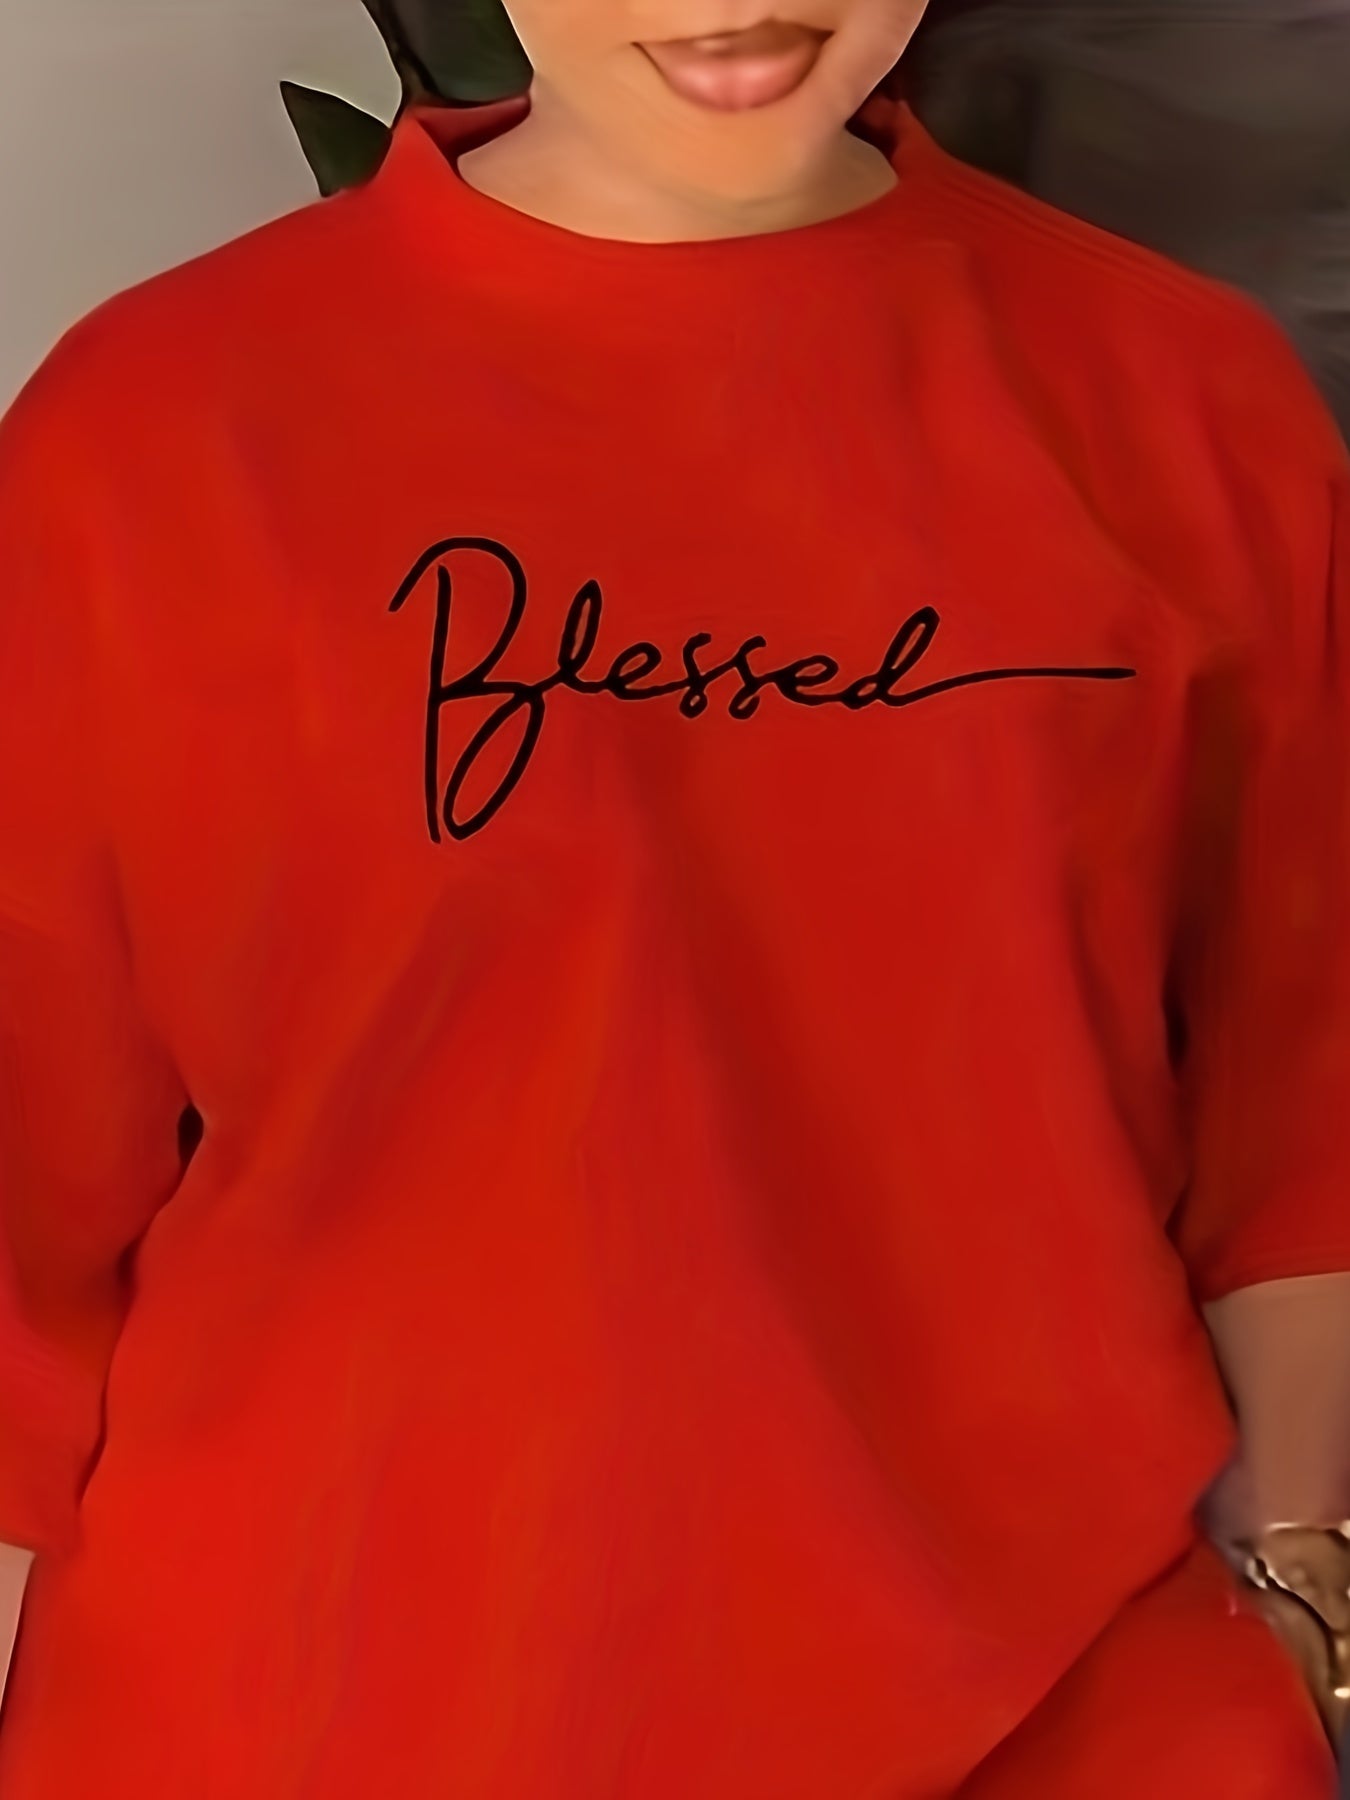 Blessed Women's Christian Casual Outfit claimedbygoddesigns